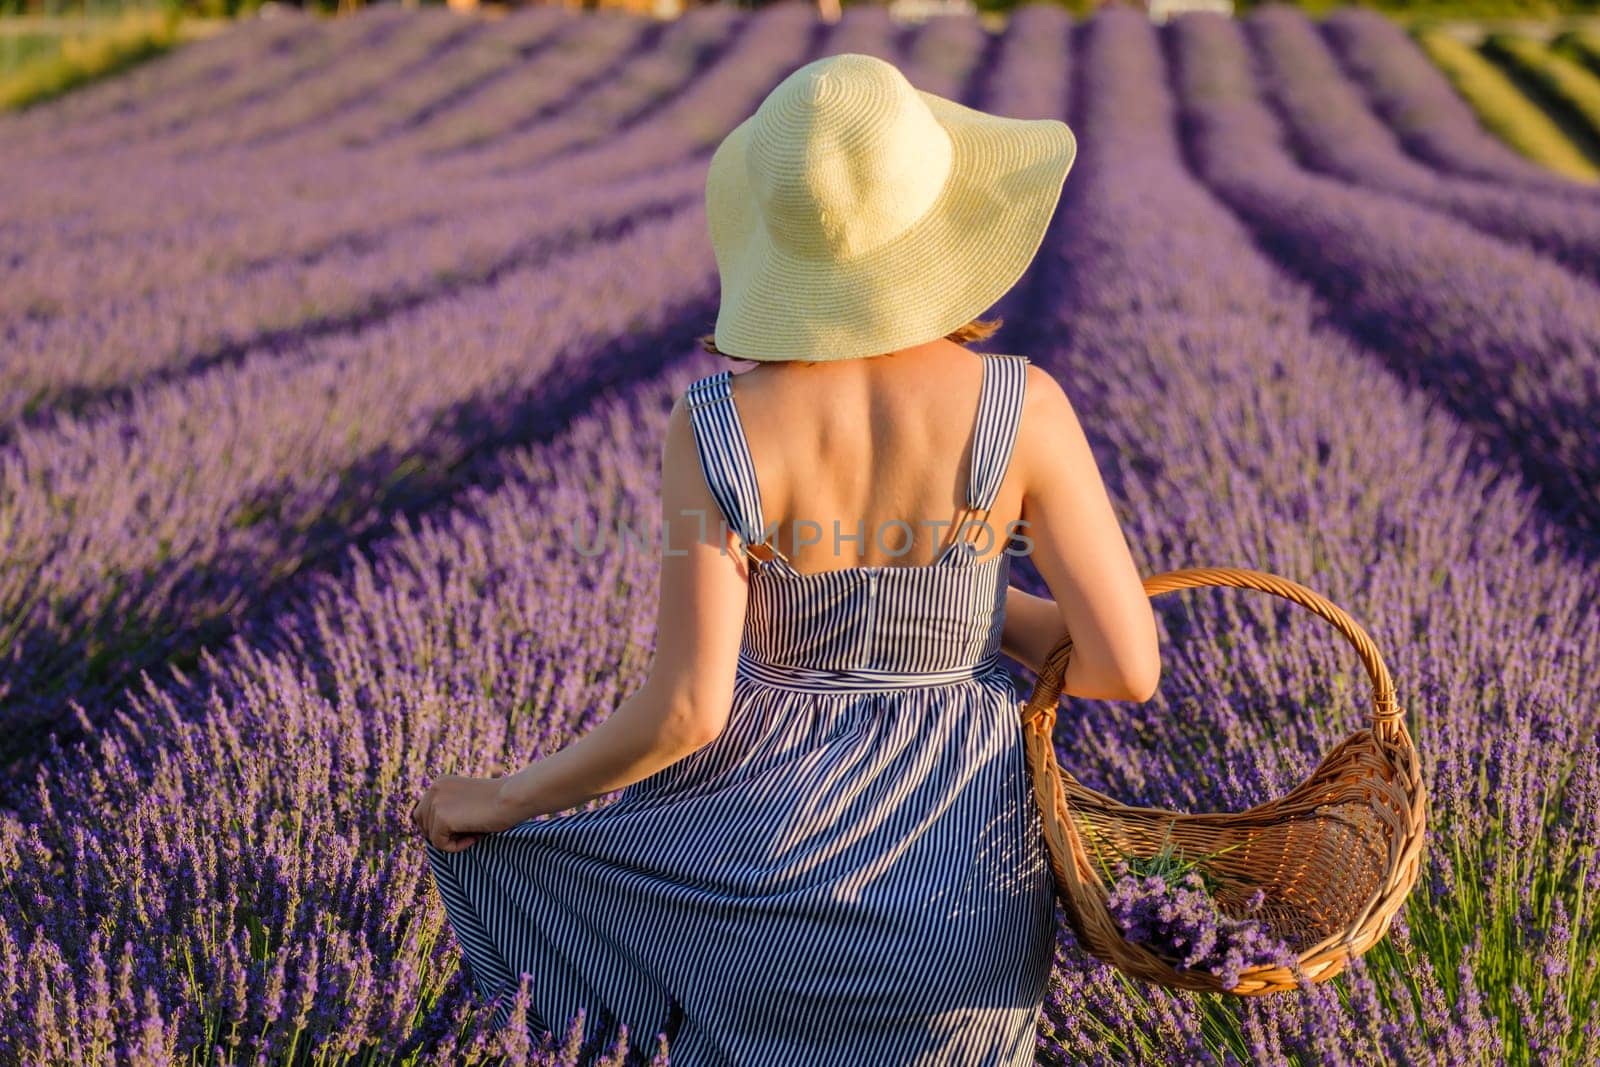 Young woman in straw hat enjoys walking in lavender field on sunny day. Lady holds wicker basket with fresh violet flowers backside view